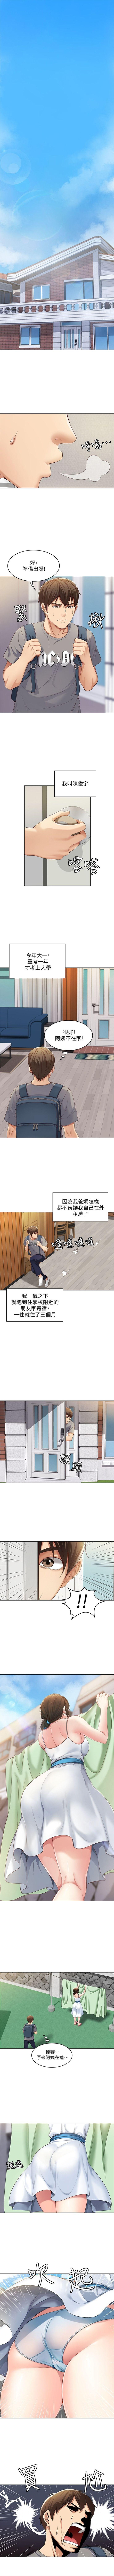 Girl 寄宿日記 1-10 官方中文（連載中） Office - Page 2